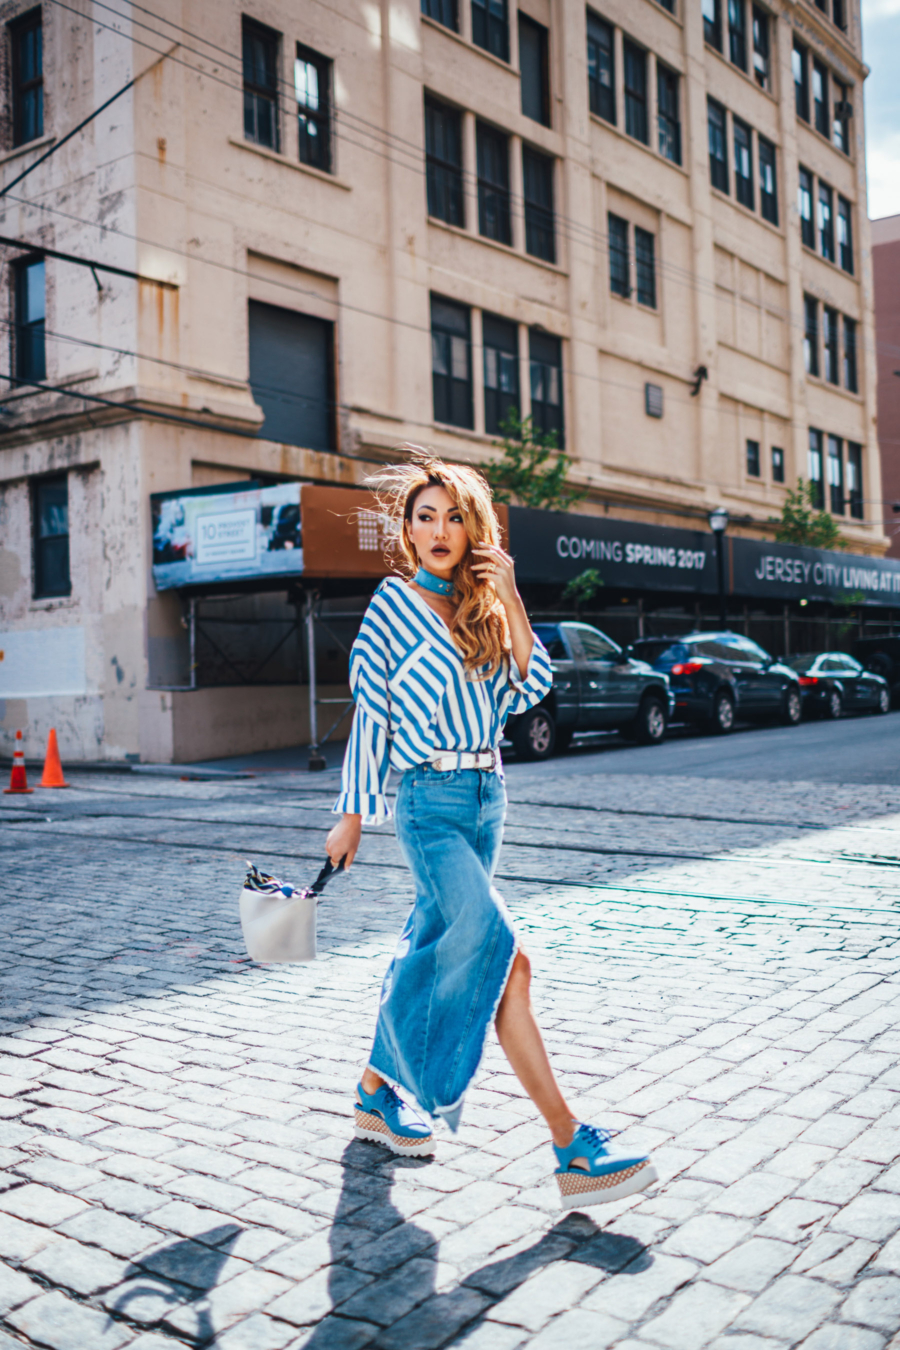 Blue Denim Skirt and Stripes Street Style - The Essential Guide to Pulling Off Summer Stripes // NotJessFashion.com